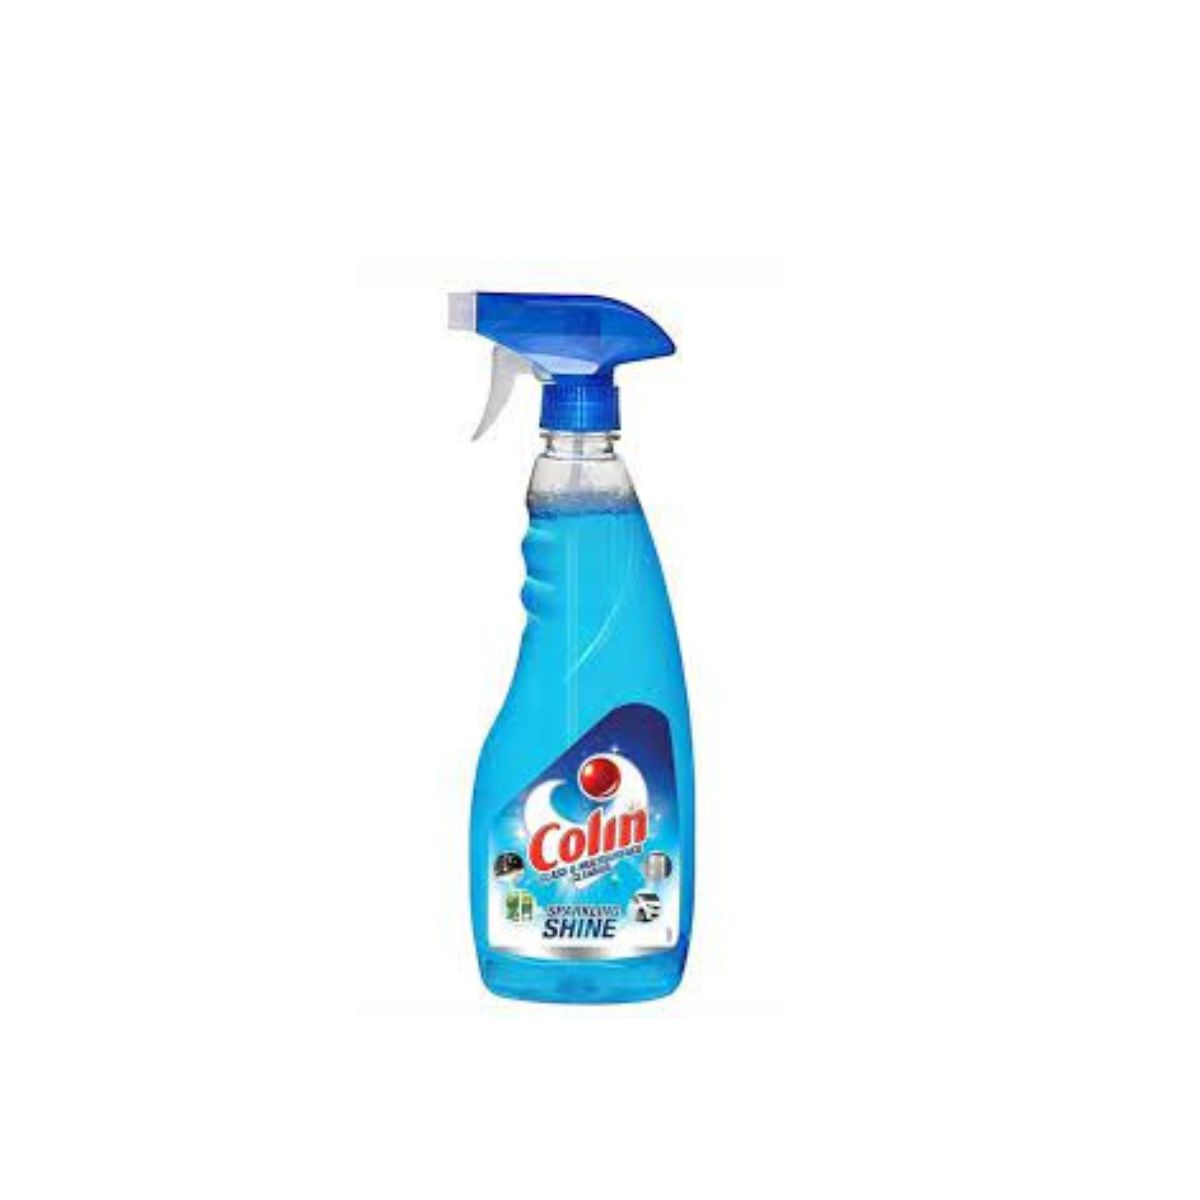 Colin Sparking Shine Glass & Multisurface Cleaner - 250ml